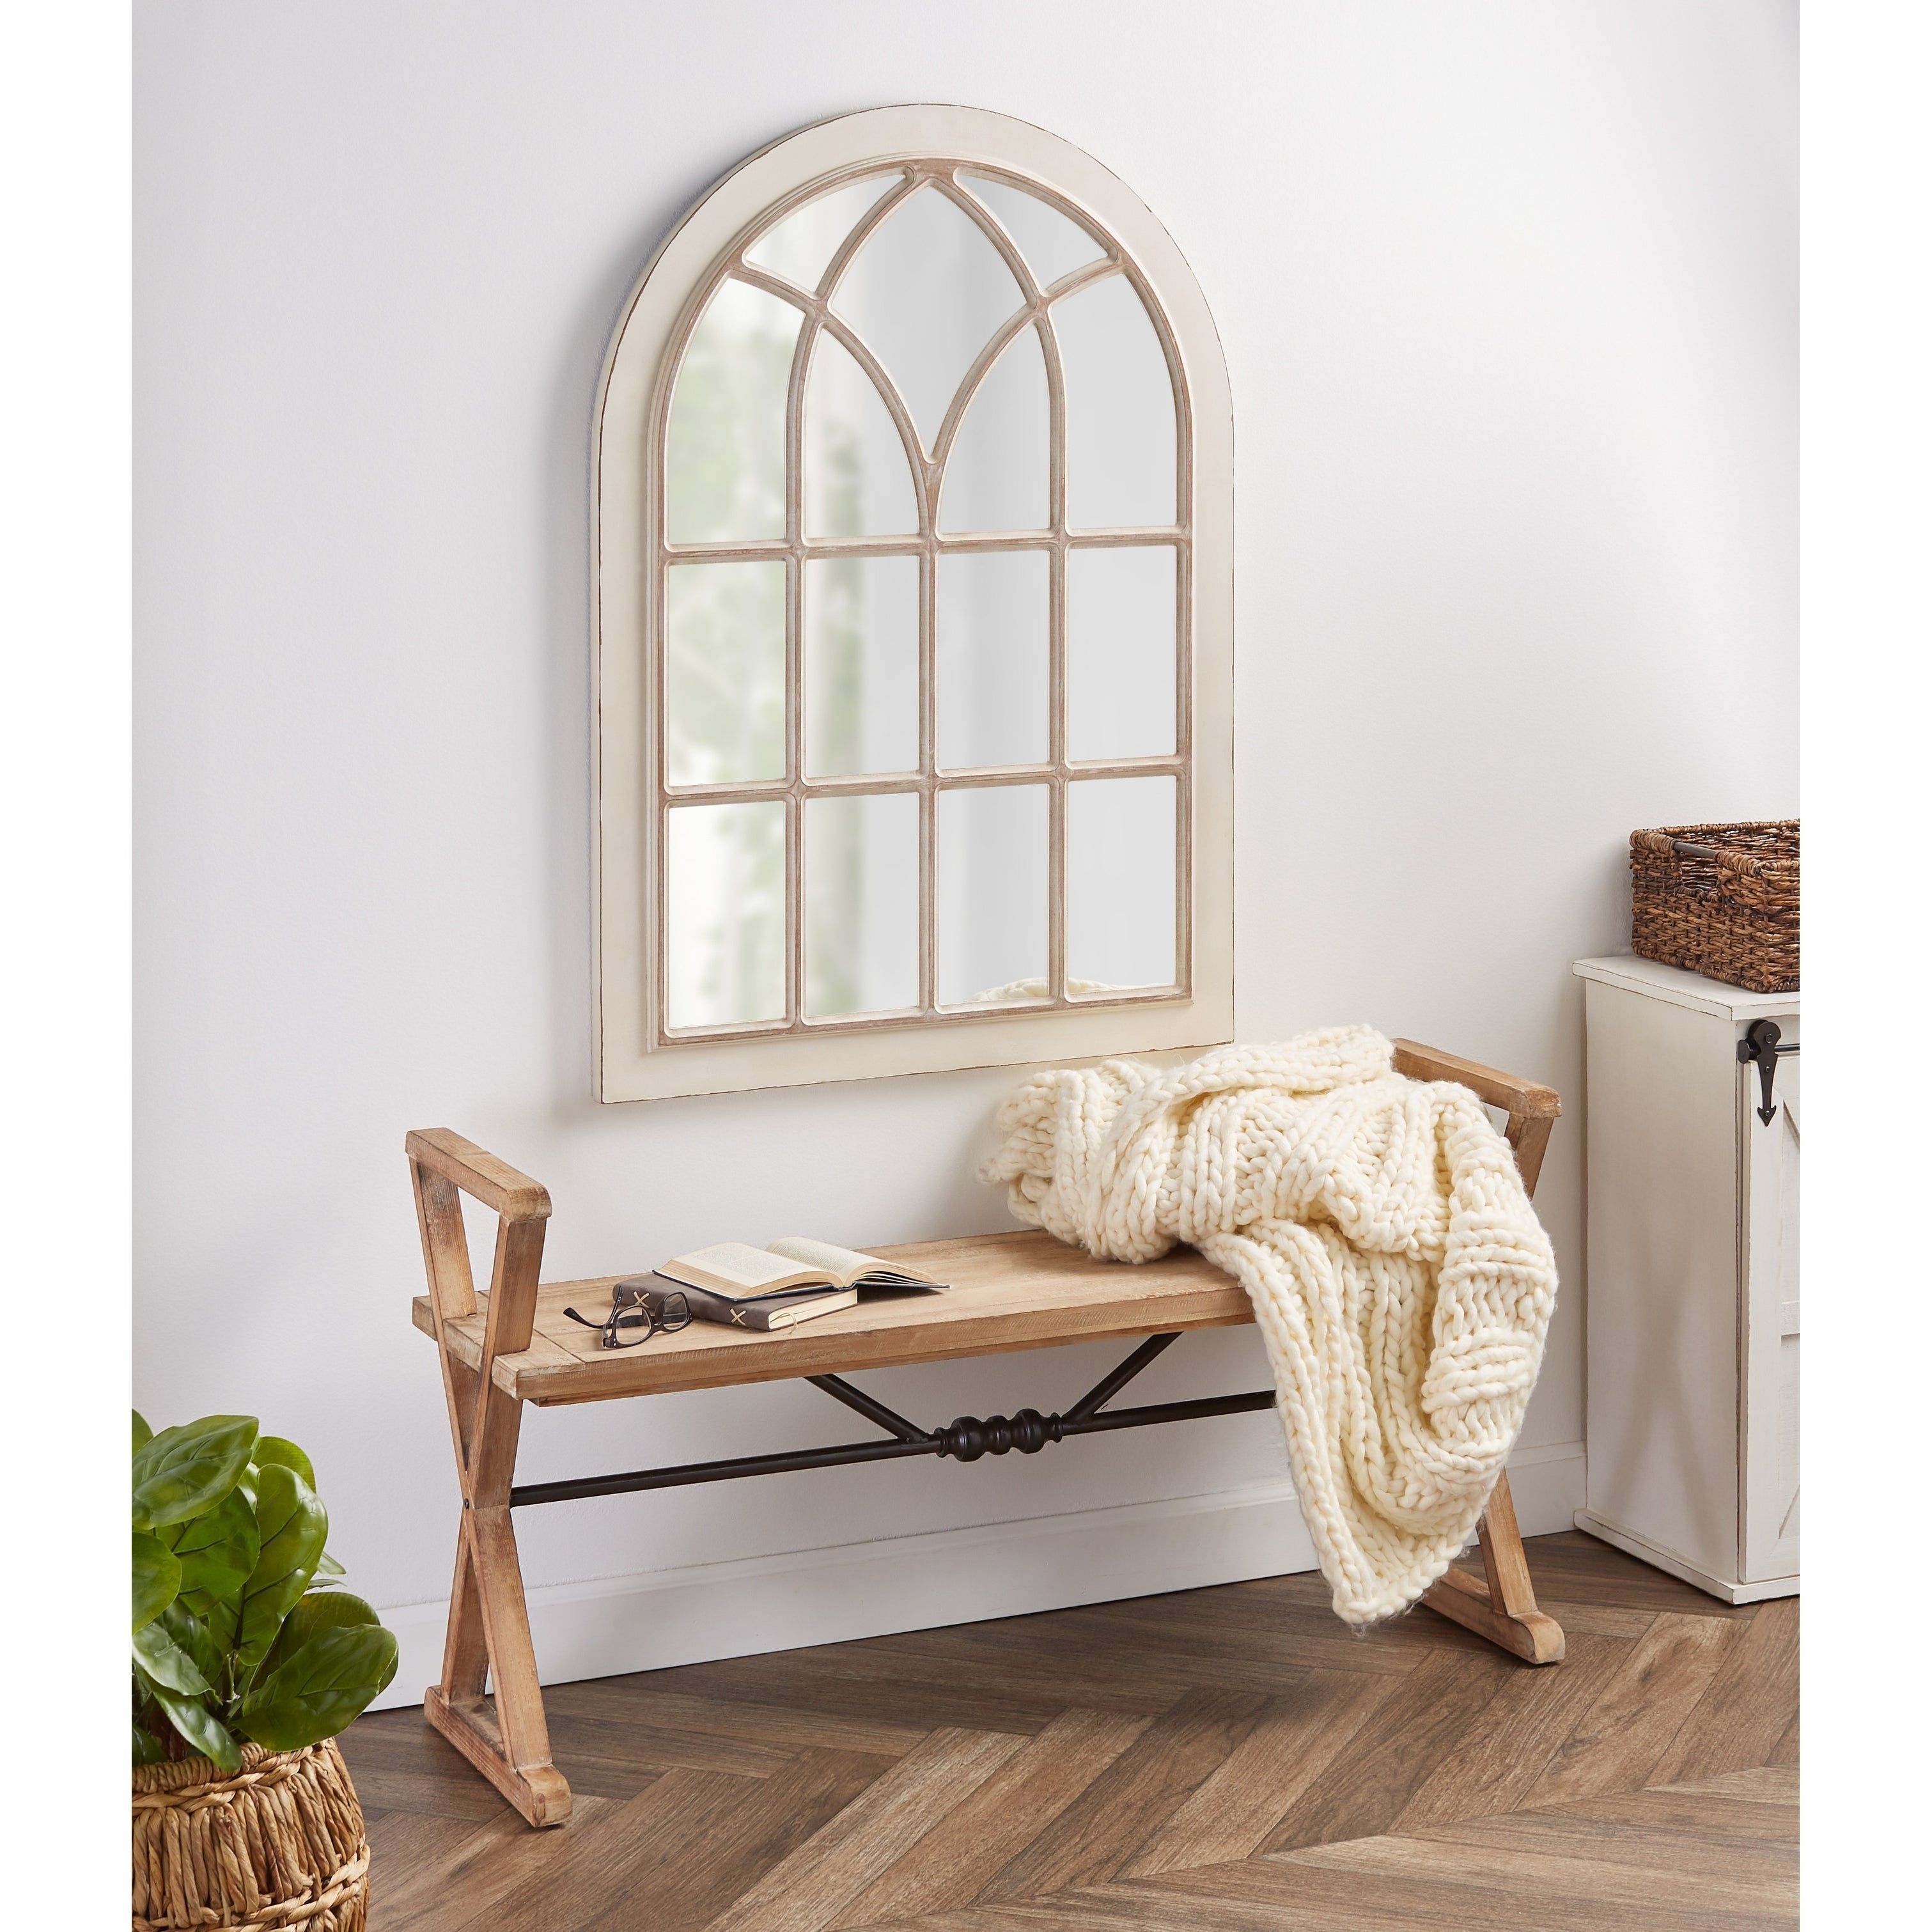 Arch Crowned Top Mirrors | Shop Online At Overstock With Regard To 2 Piece Kissena Window Pane Accent Mirror Sets (View 10 of 20)